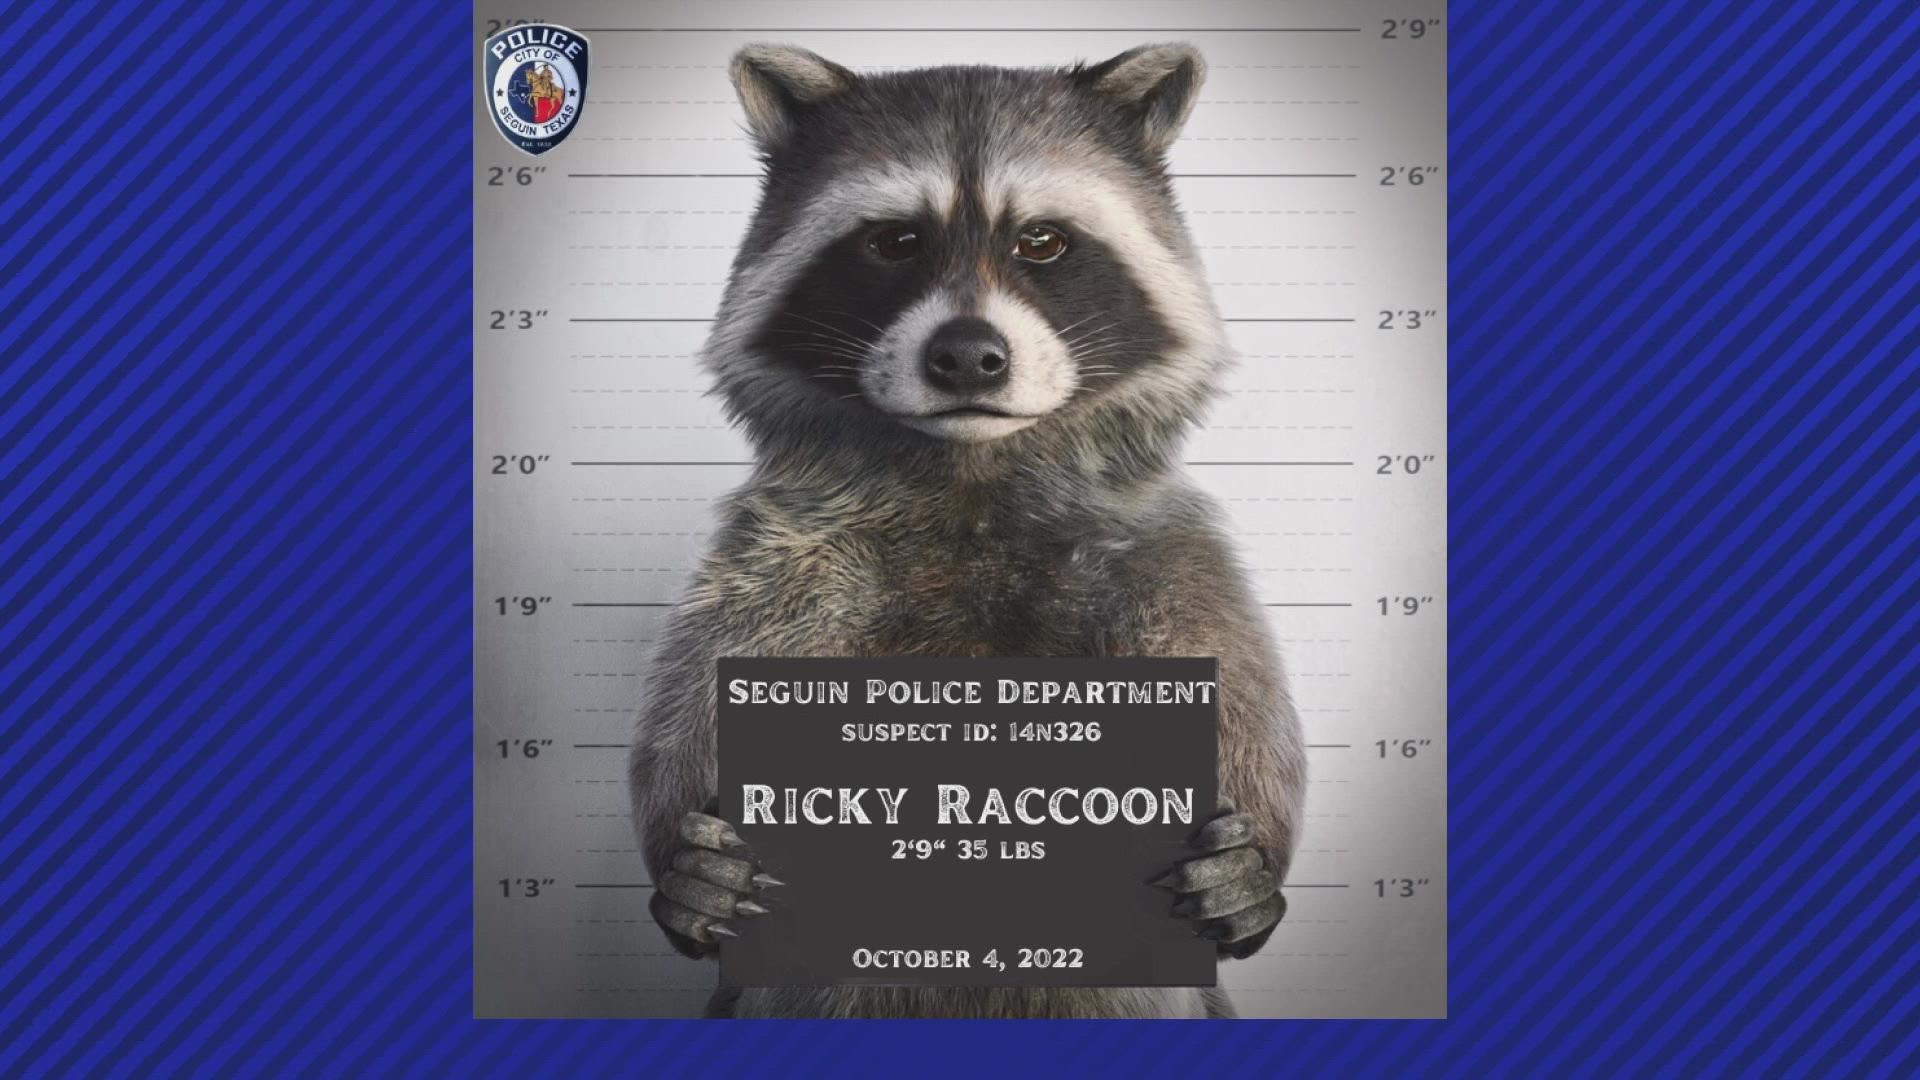 Police have shared the mugshot of "Ricky Raccoon", an alleged suspect in the recurring city-wide power outages.